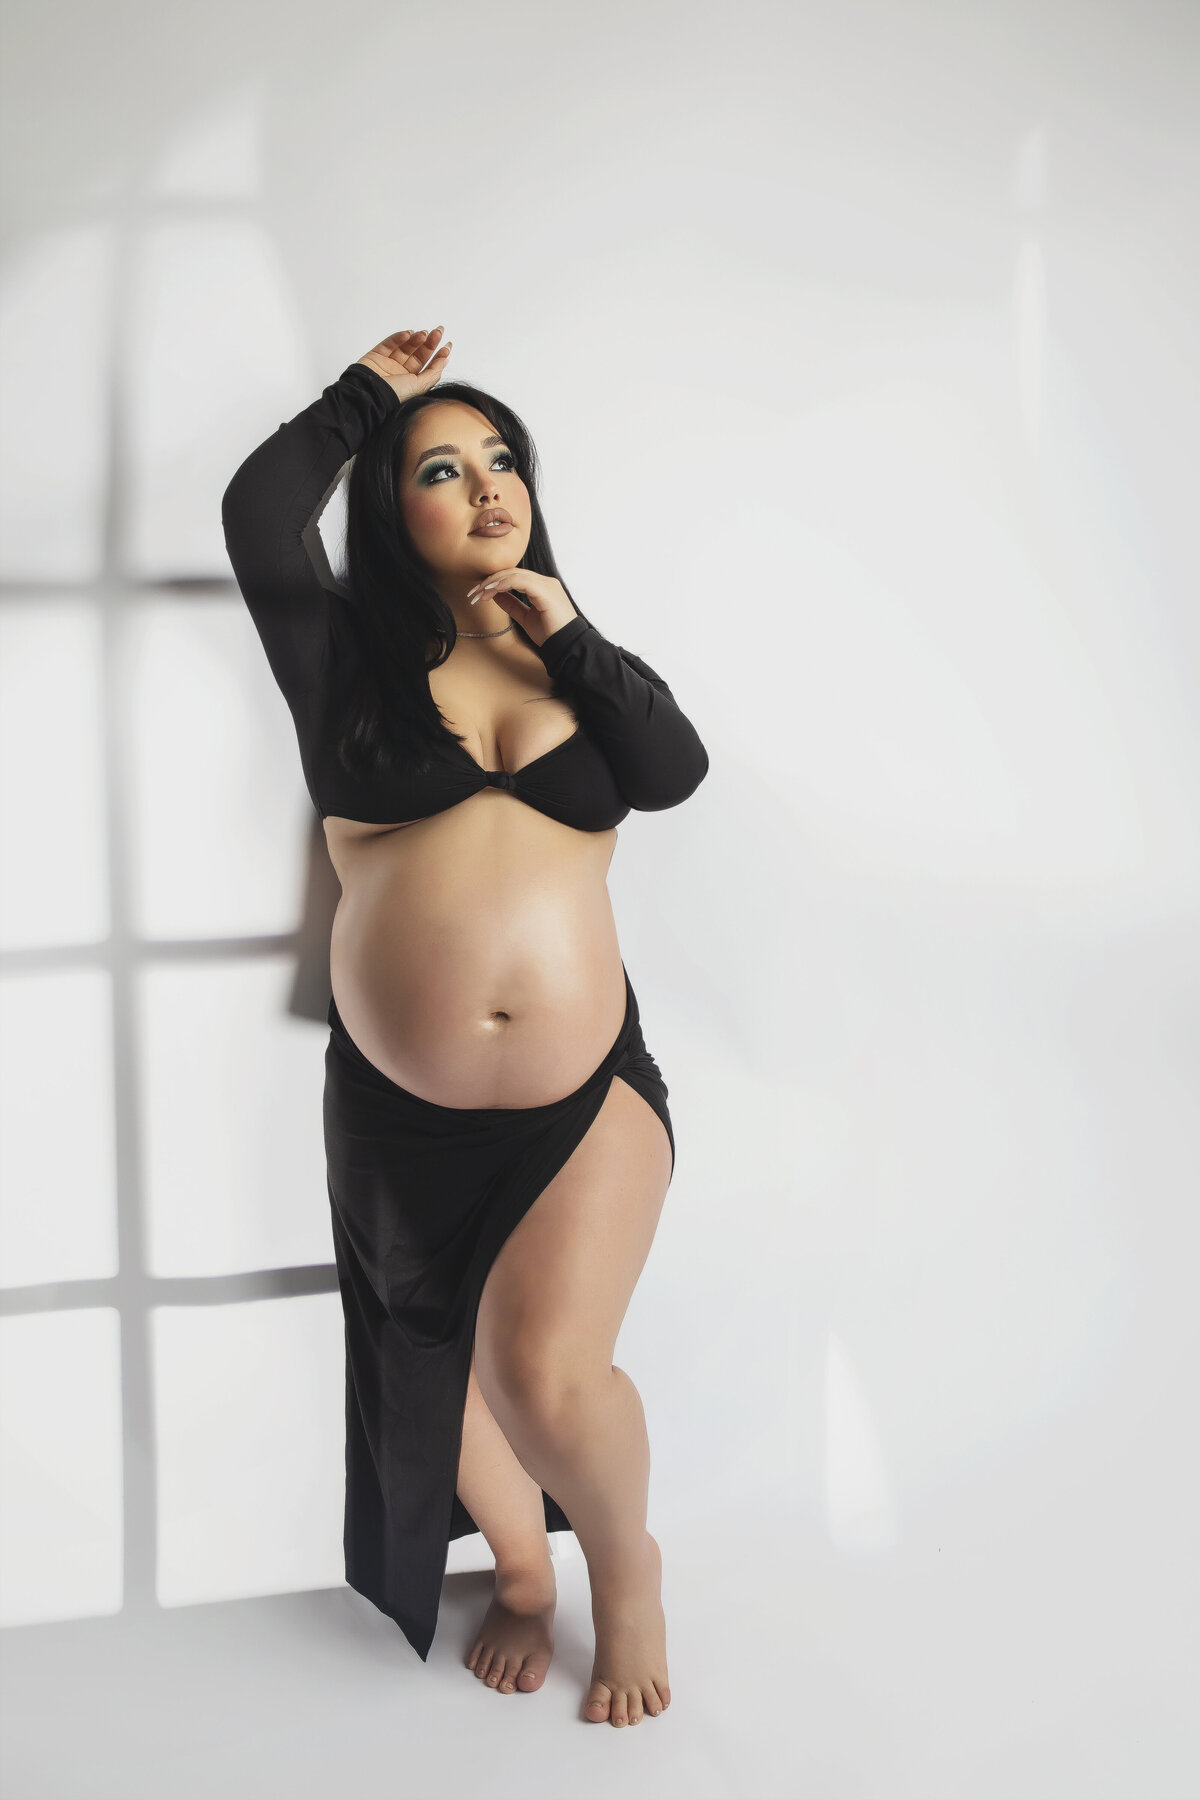 should you take maternity pictures?